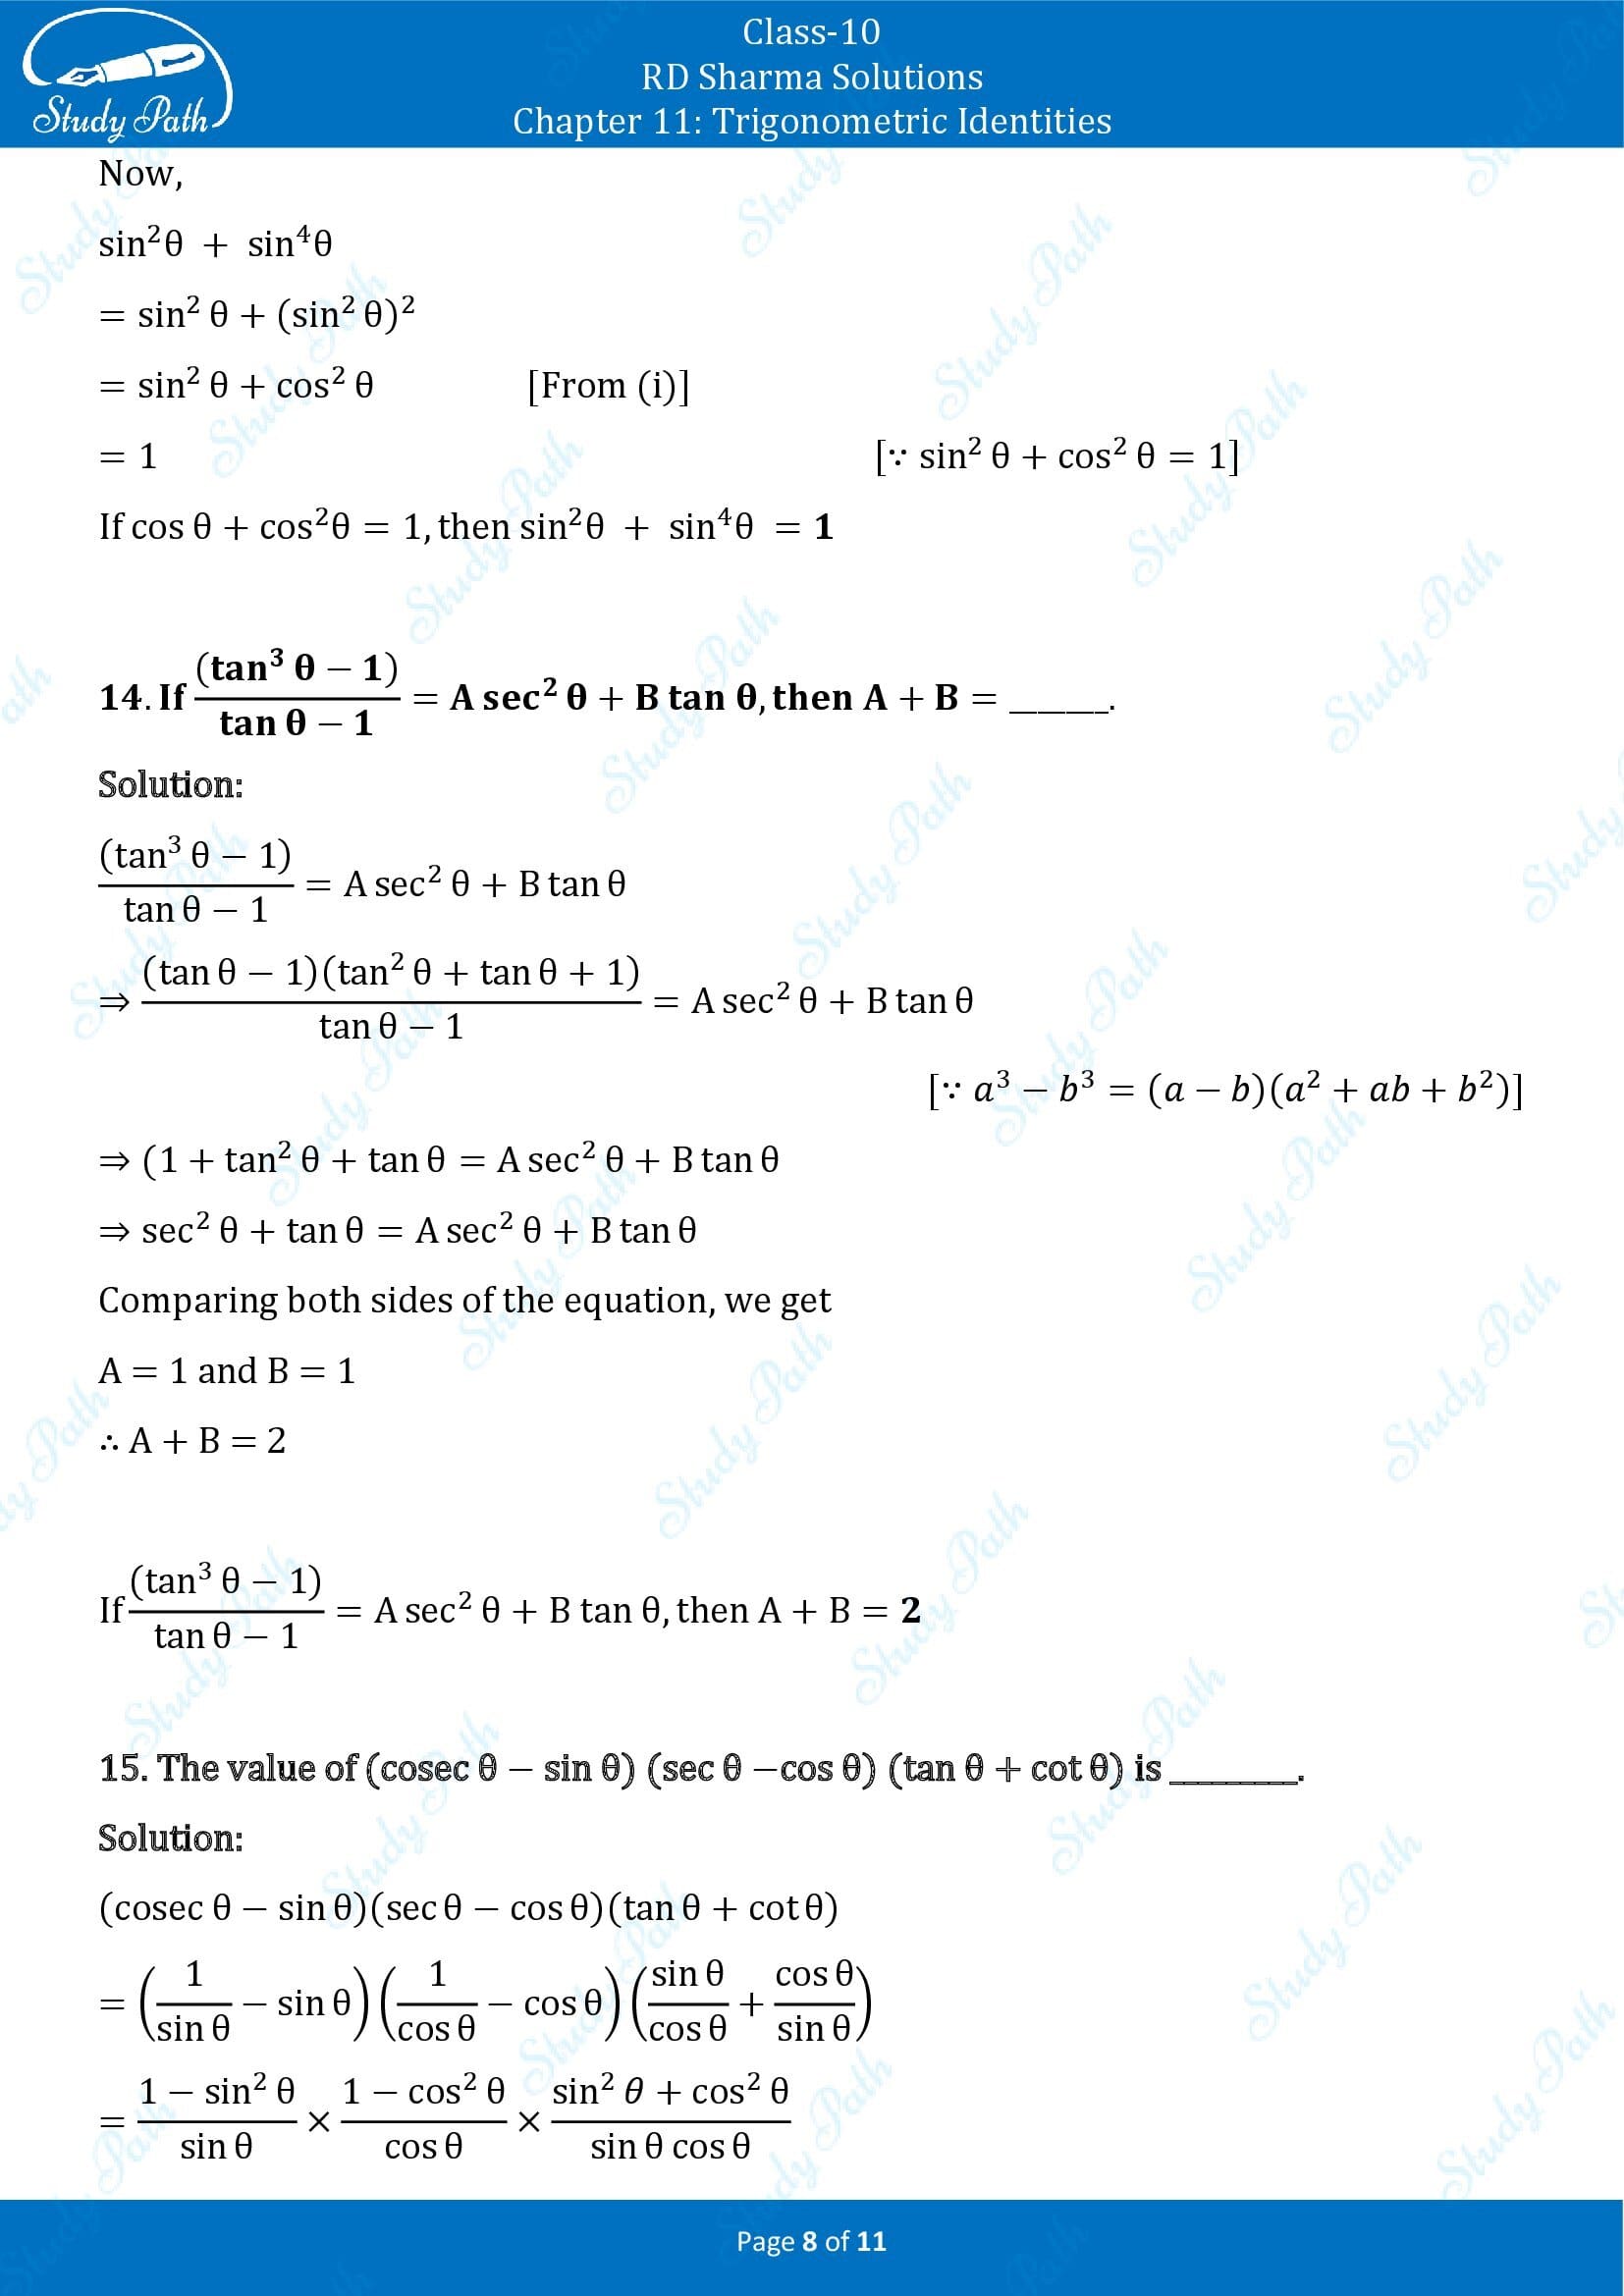 RD Sharma Solutions Class 10 Chapter 11 Trigonometric Identities Fill in the Blank Type Questions FBQs 00008